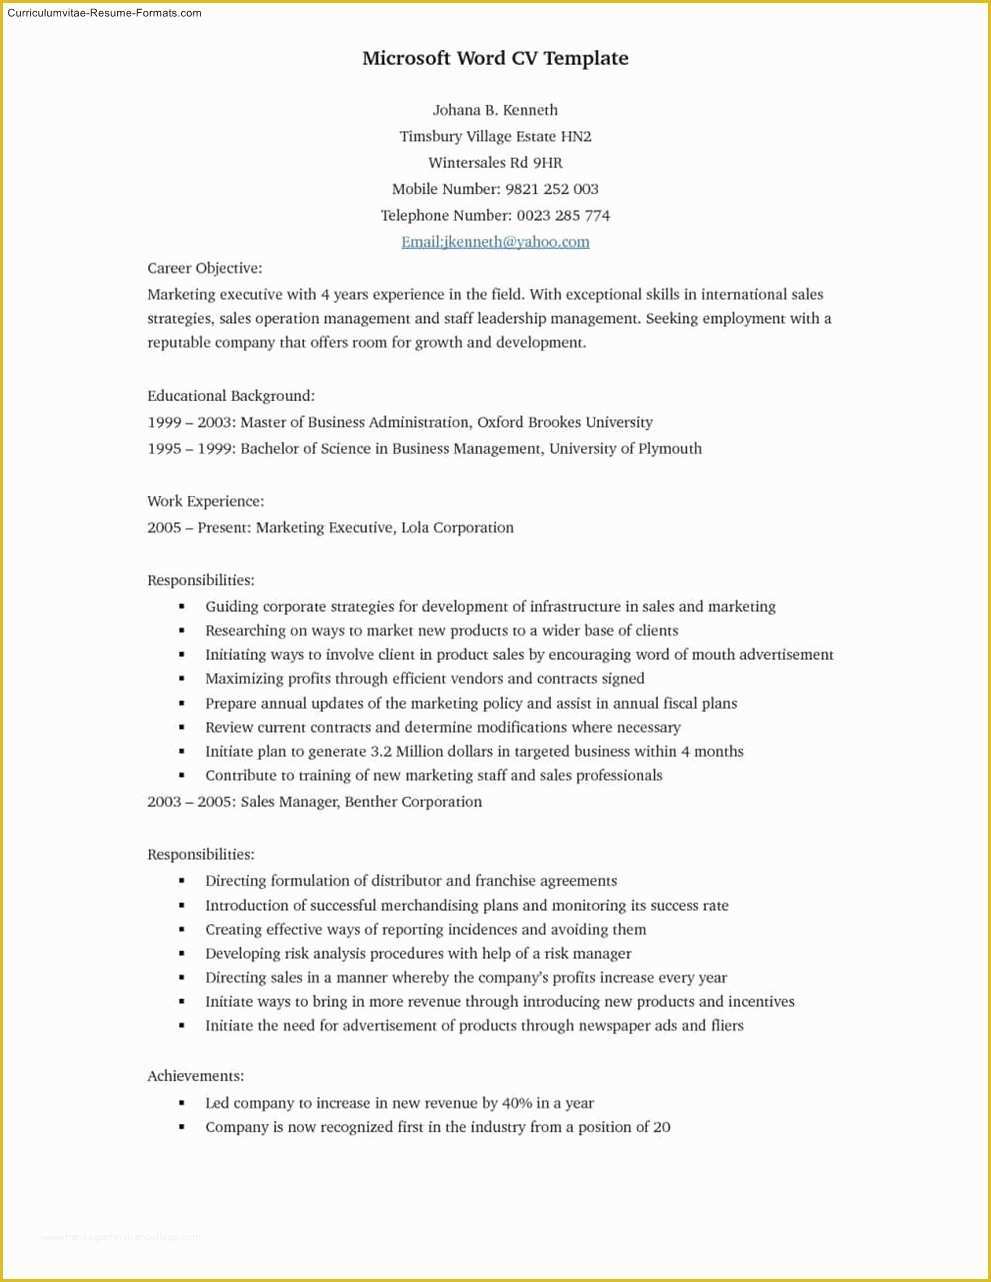 Microsoft Word Free Templates for Resumes Of Best Resume Template Microsoft Word Free Samples